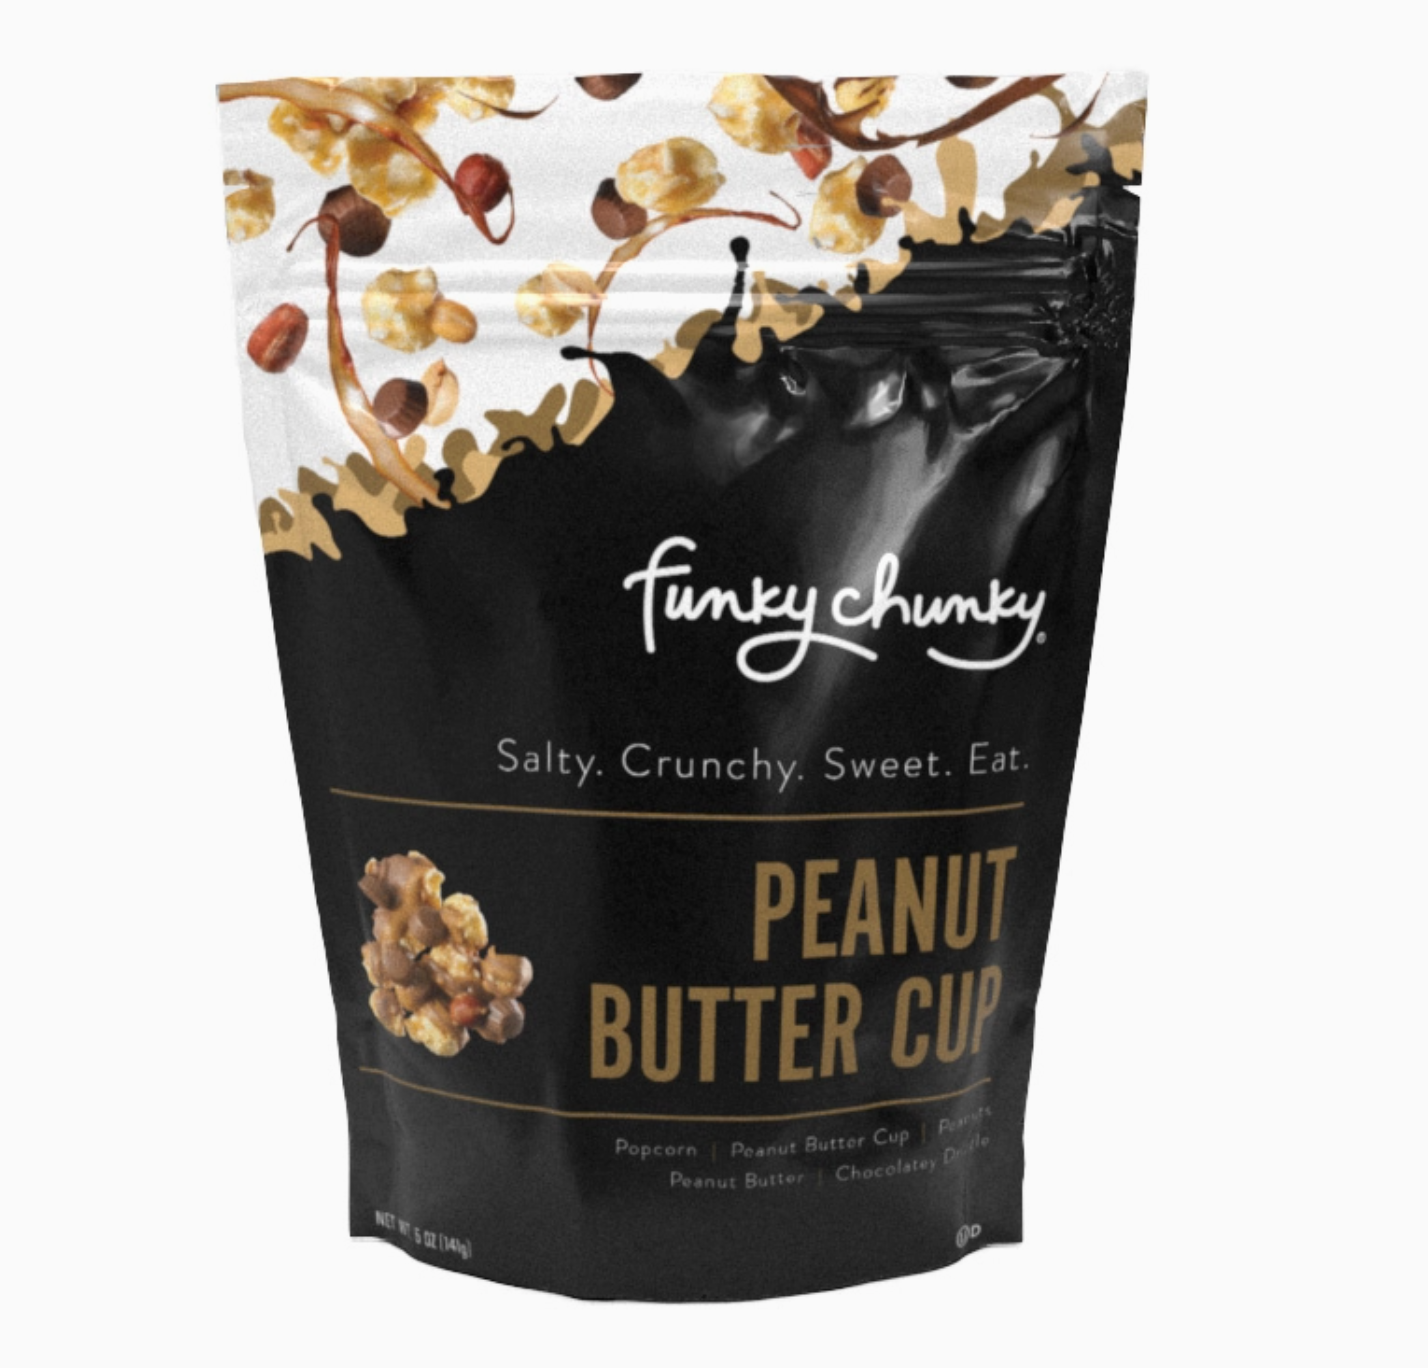 Funky Chunky Peanut Butter Cup 5oz Bag